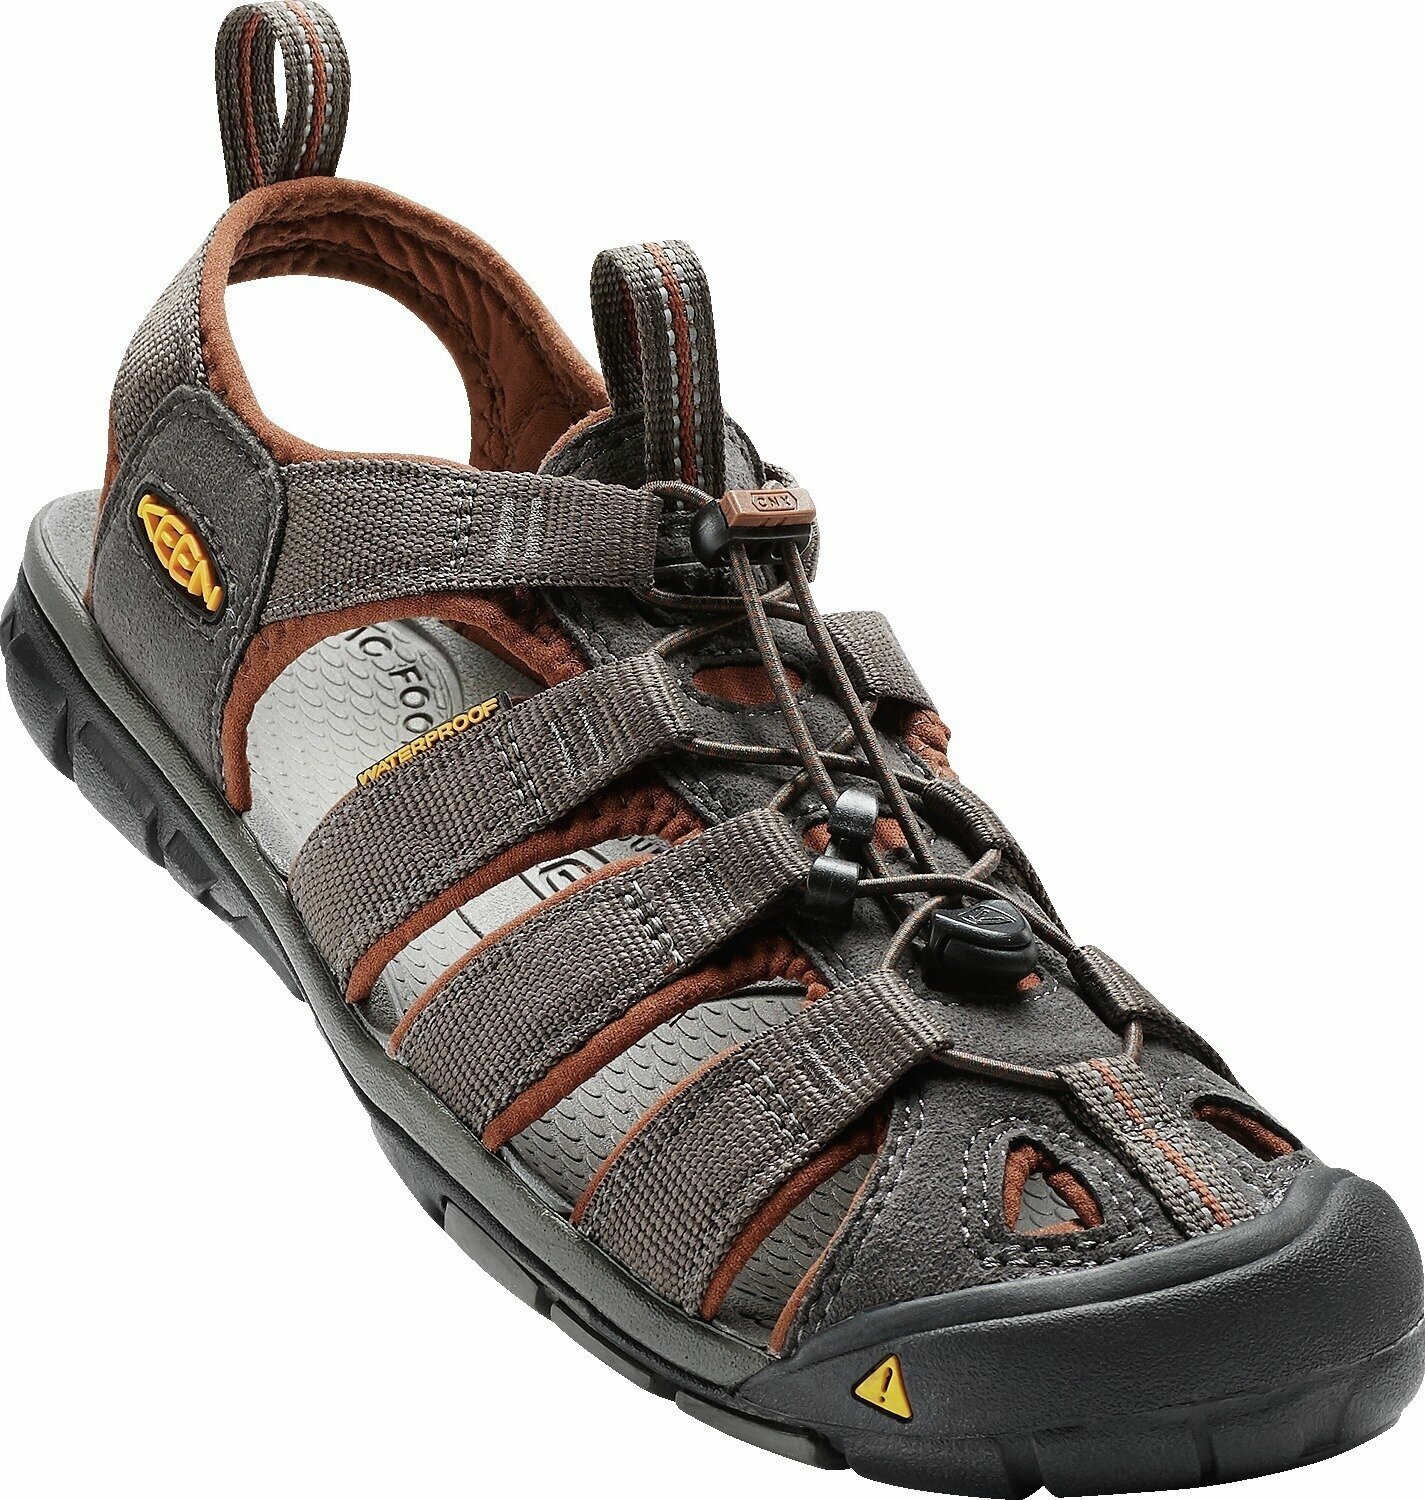 Chaussures outdoor hommes Keen Men's Clearwater CNX Sandal Raven/Tortoise Shell 44 Chaussures outdoor hommes